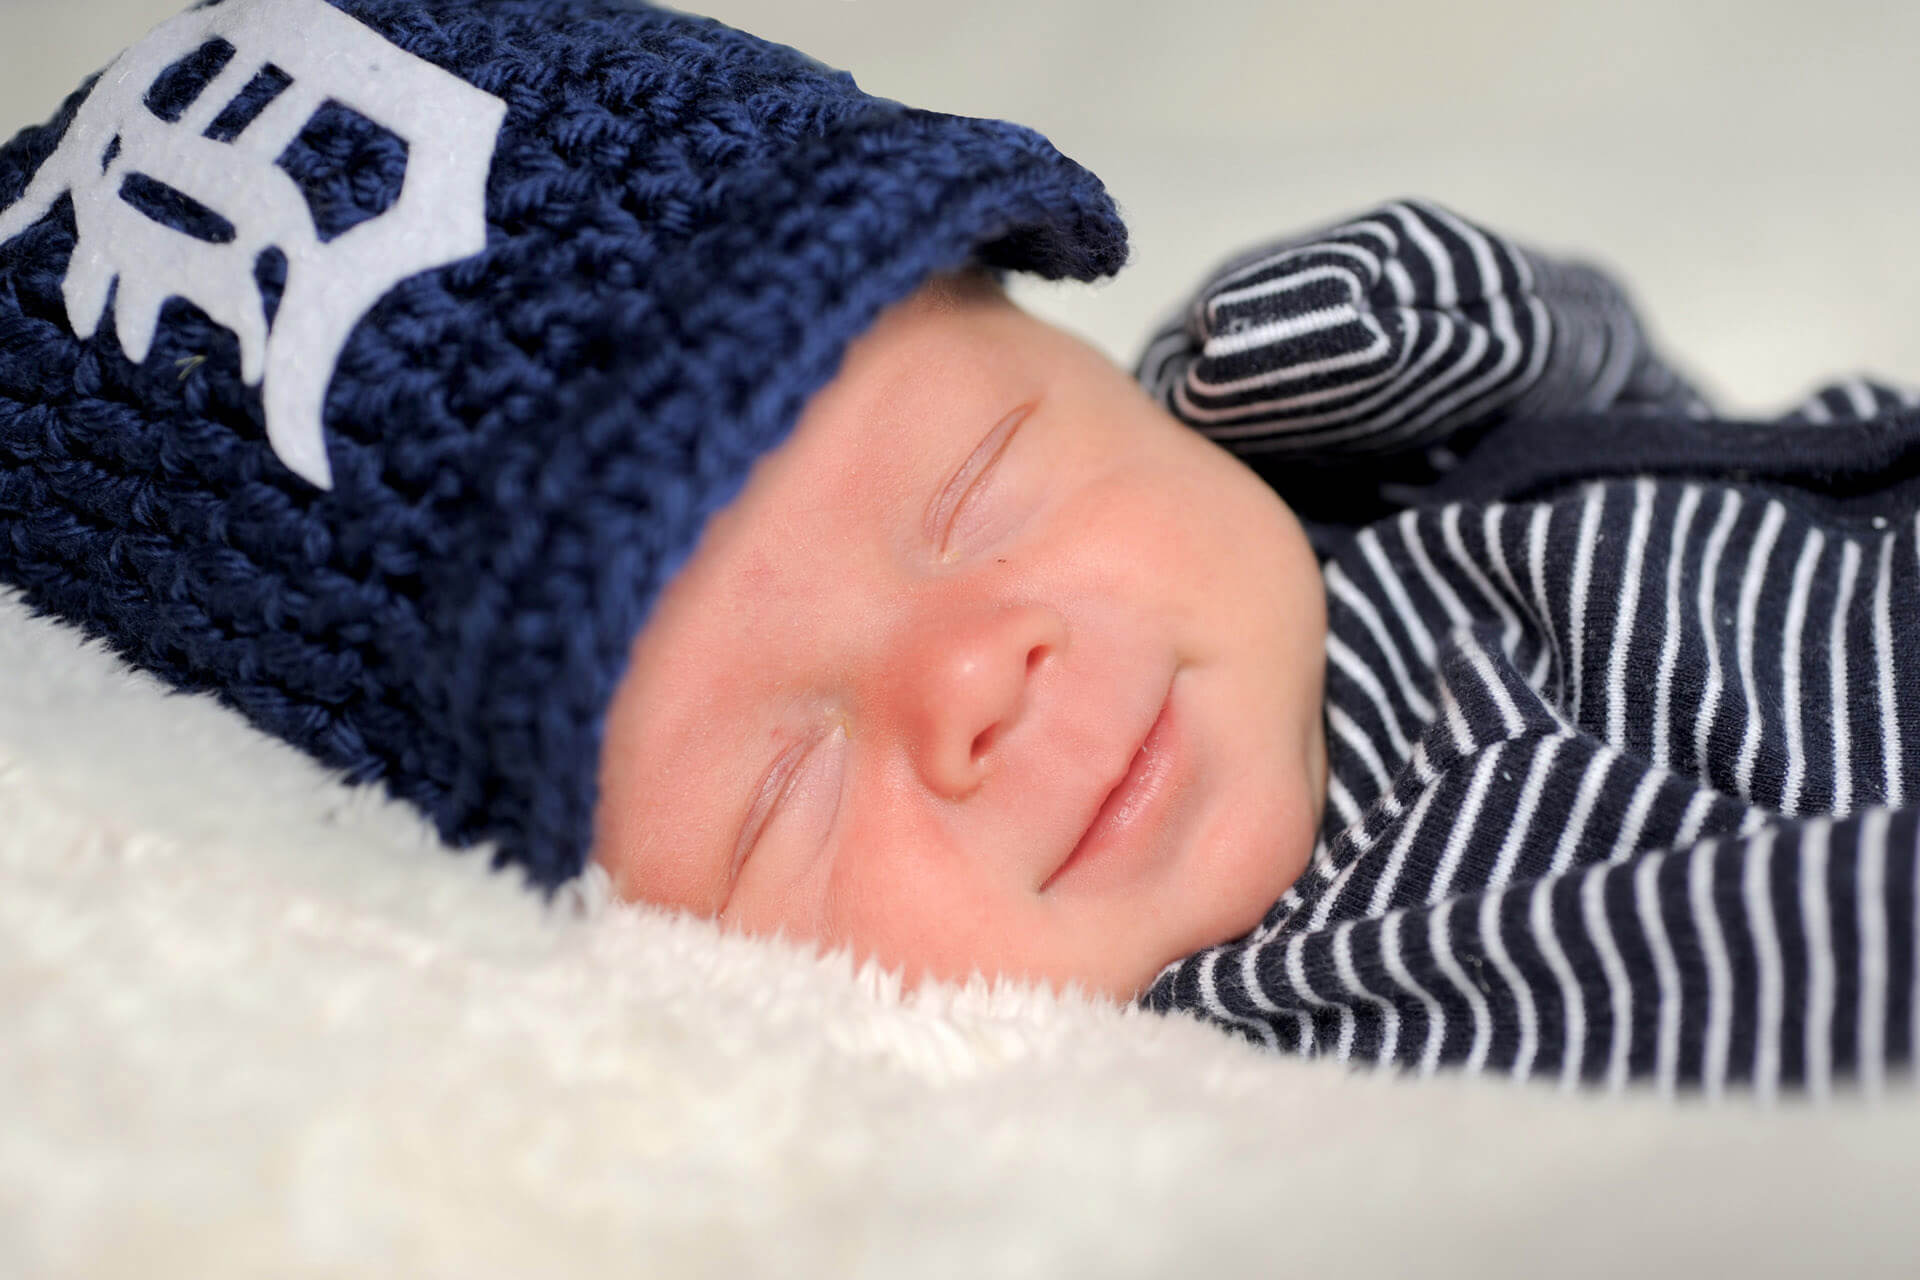 Best Detroit infant photographer usually has a lot of baby photography sessions in her Troy, Michigan studio like this Detroit Tiger fan infant in metro Detroit, Michigan.